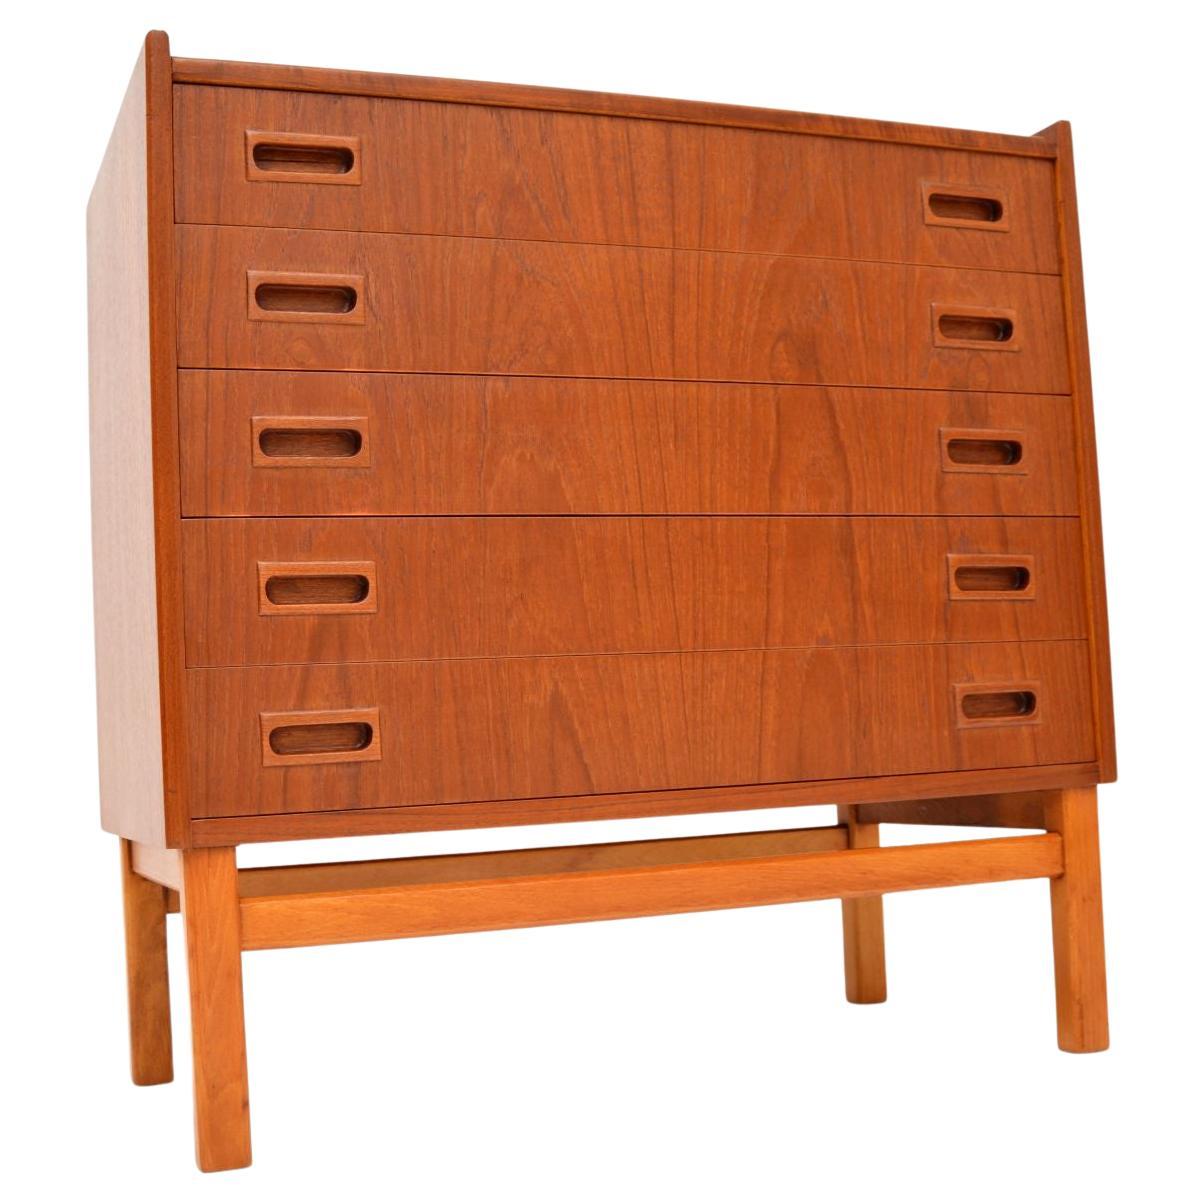 1960's Danish Teak Vintage Chest of Drawers For Sale